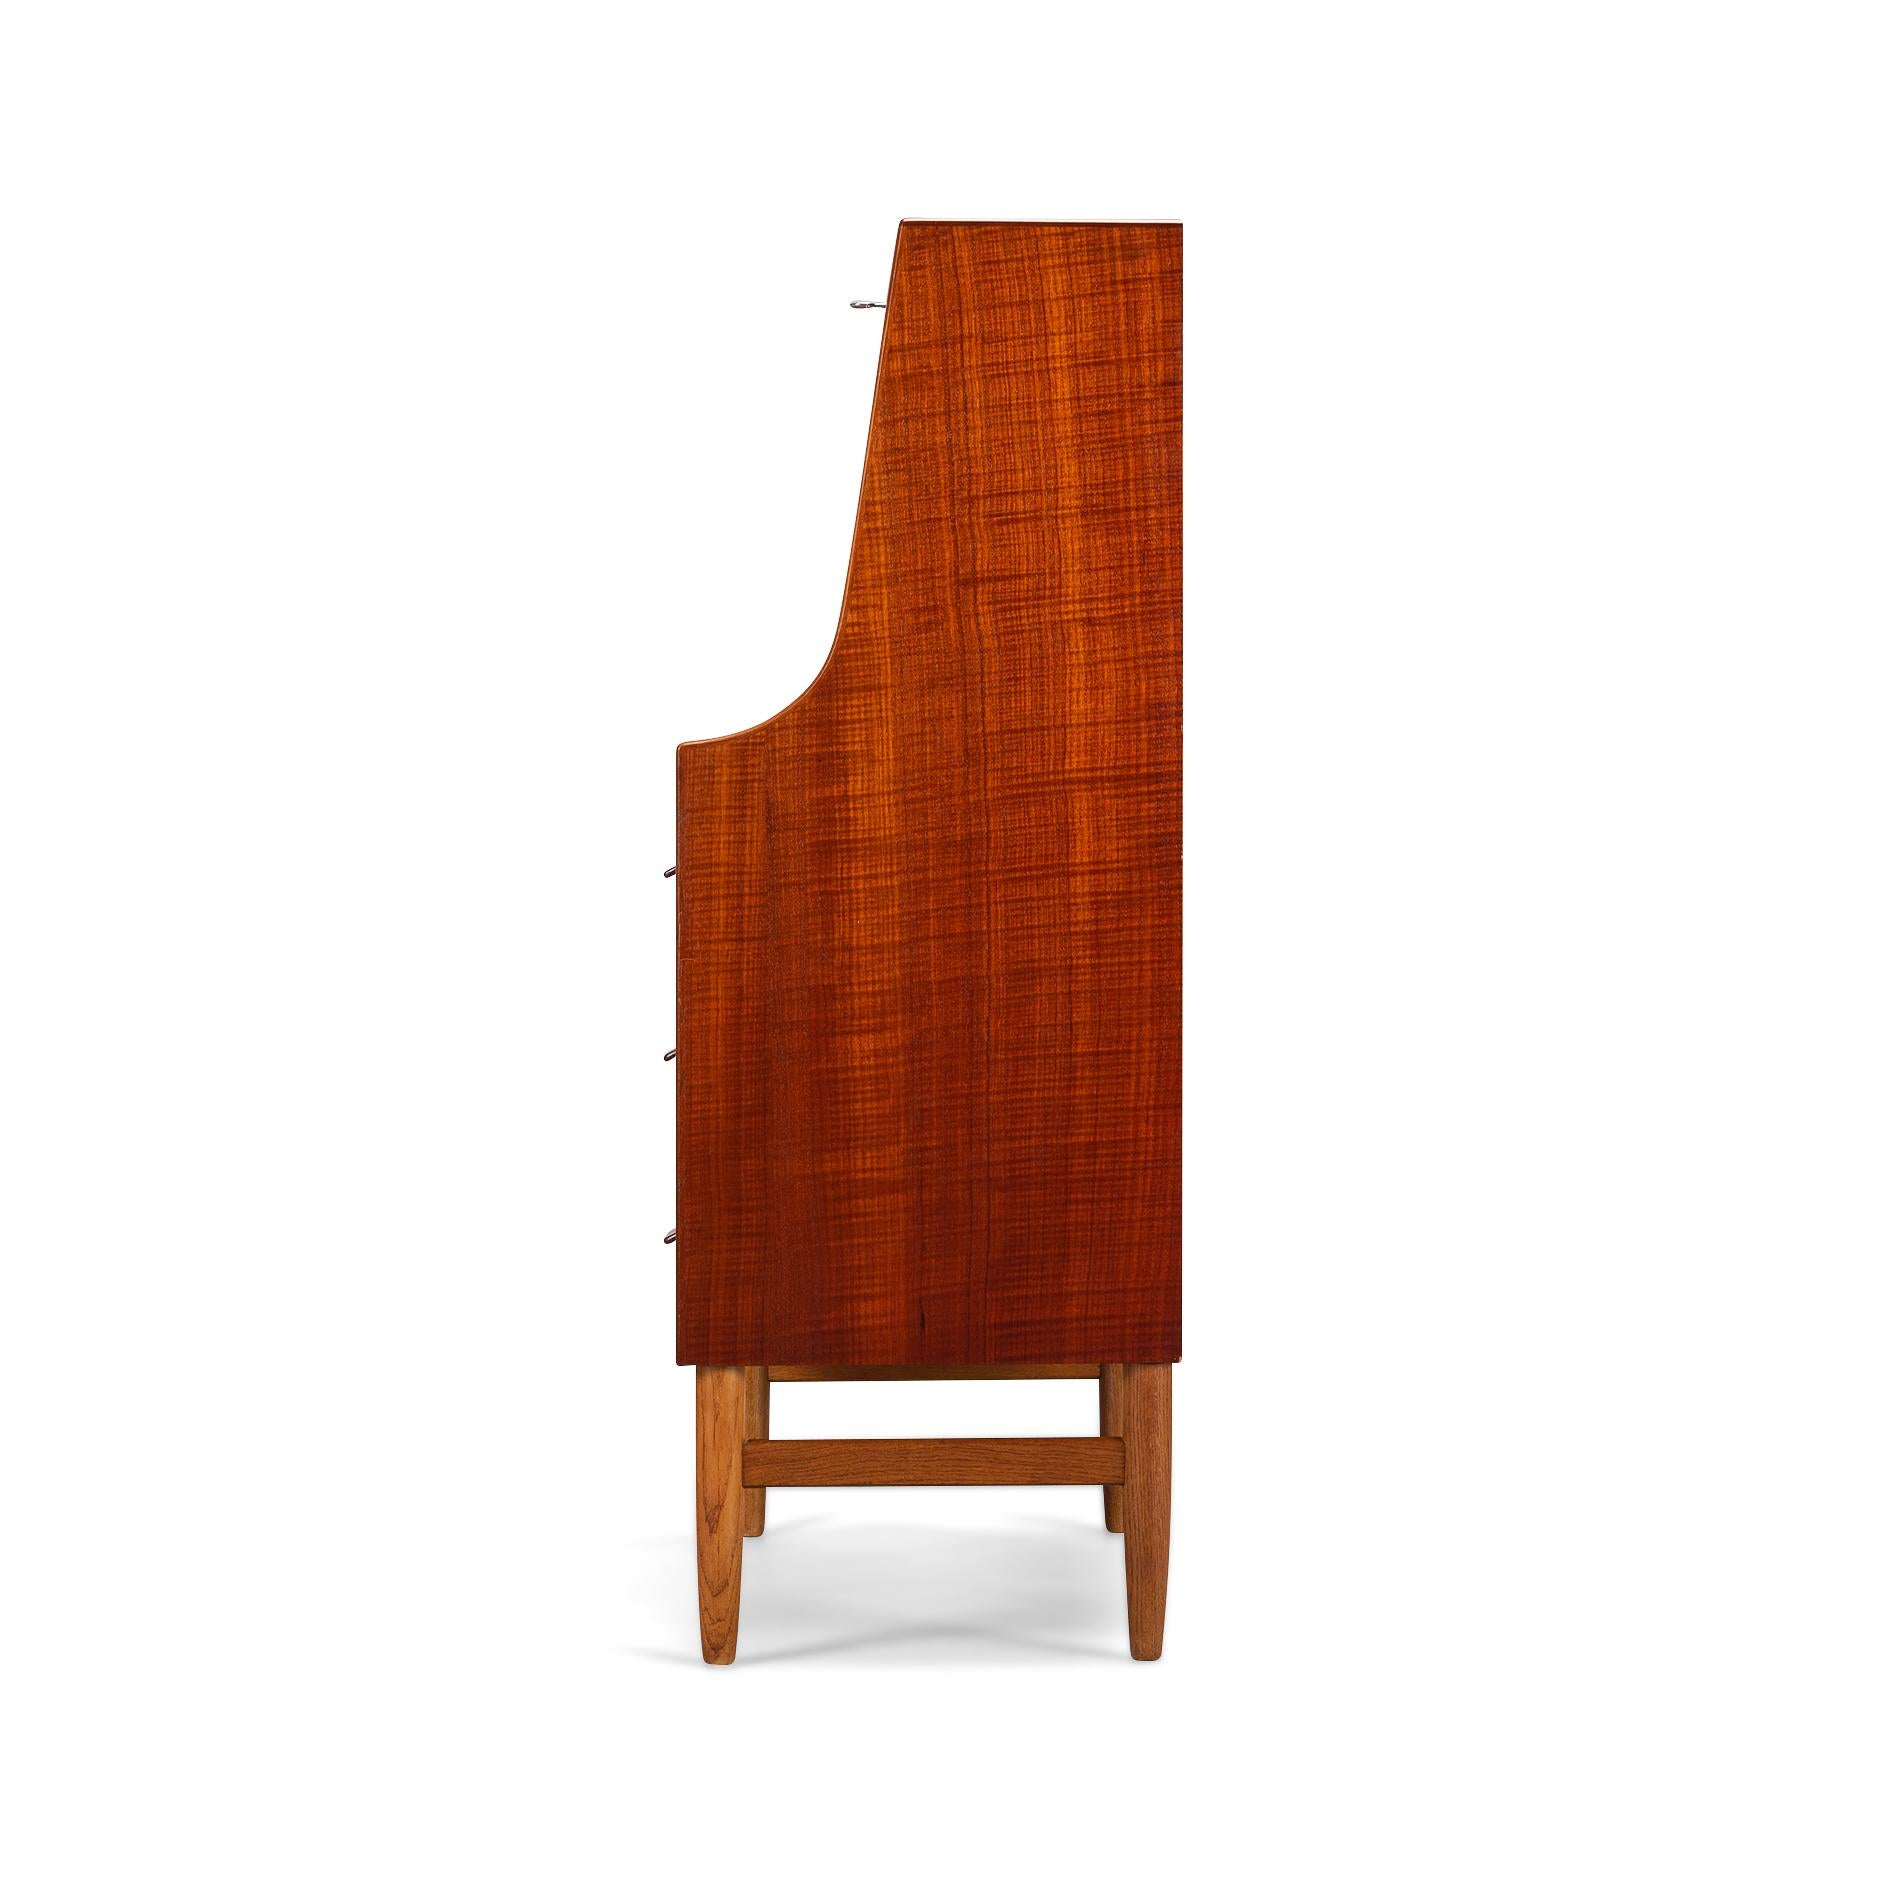 Danish Mid-Century Modern Secretary by Poul Volther, 1960s For Sale